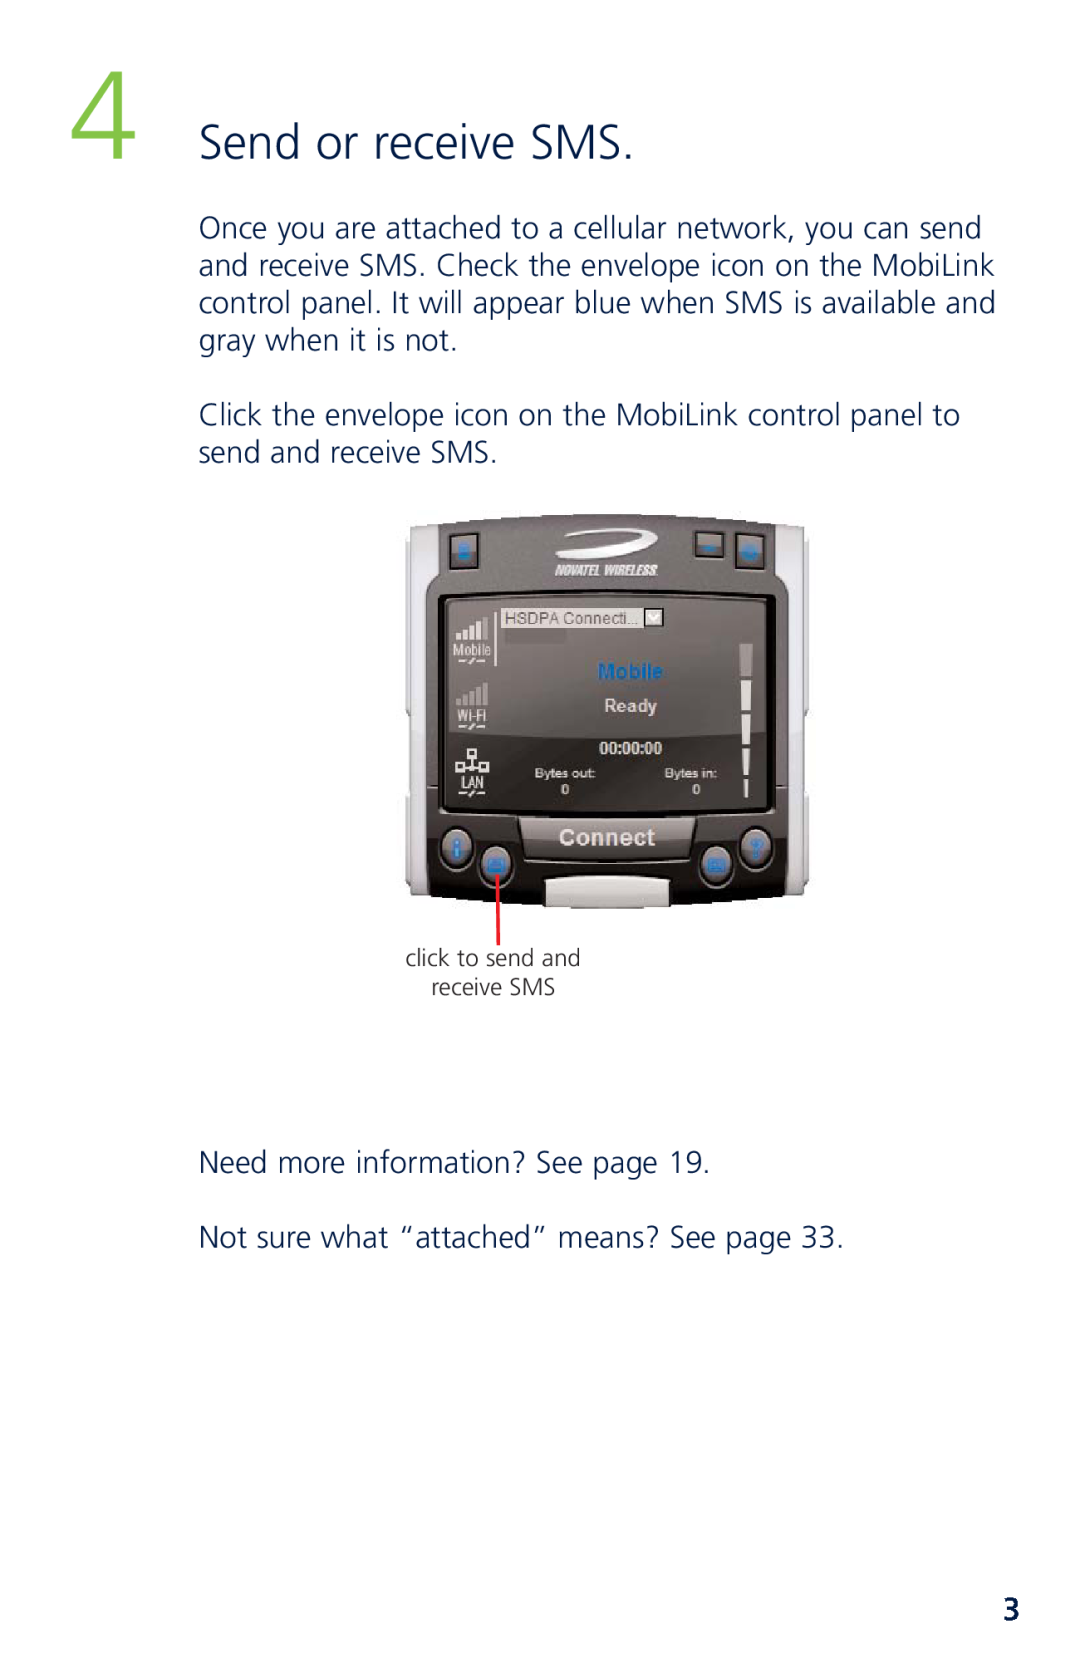 Novatel XU870 manual Send or receive SMS, Need more information? See page, Not sure what “attached” means? See page 